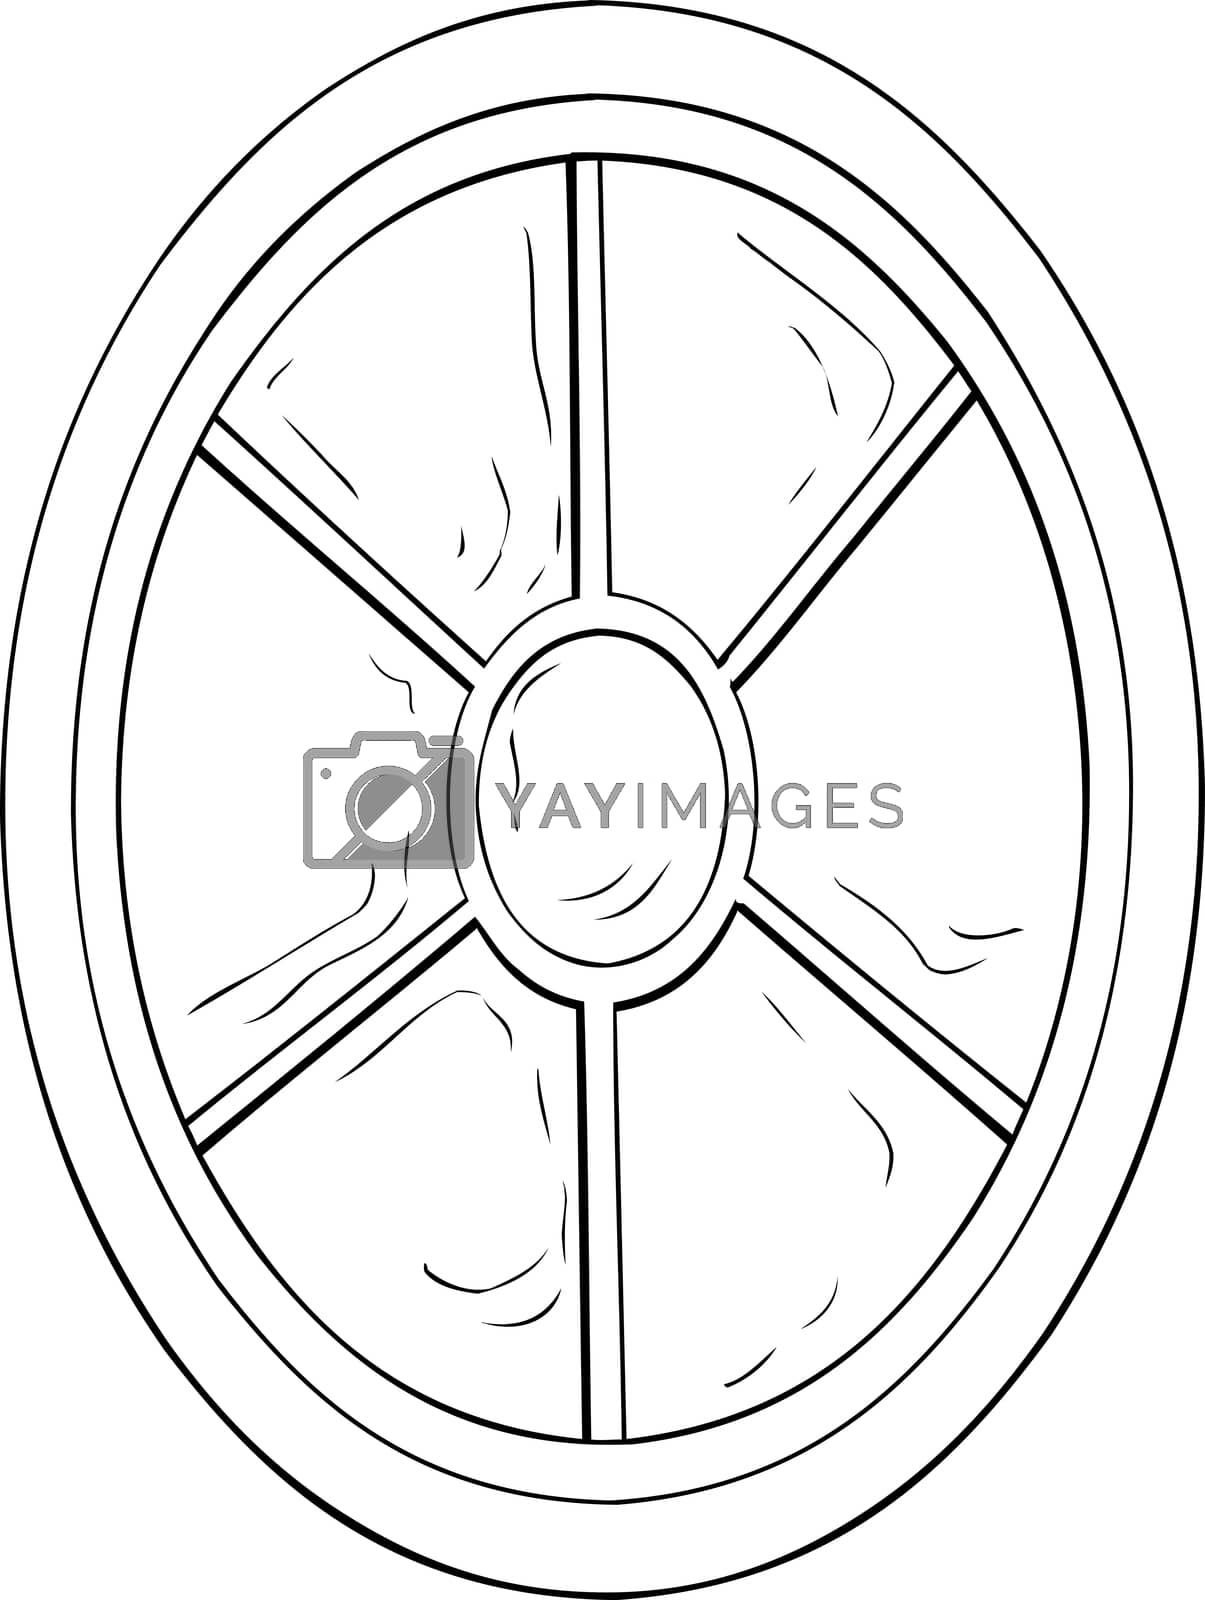 Royalty free image of Outlined oval shaped window illustration by TheBlackRhino